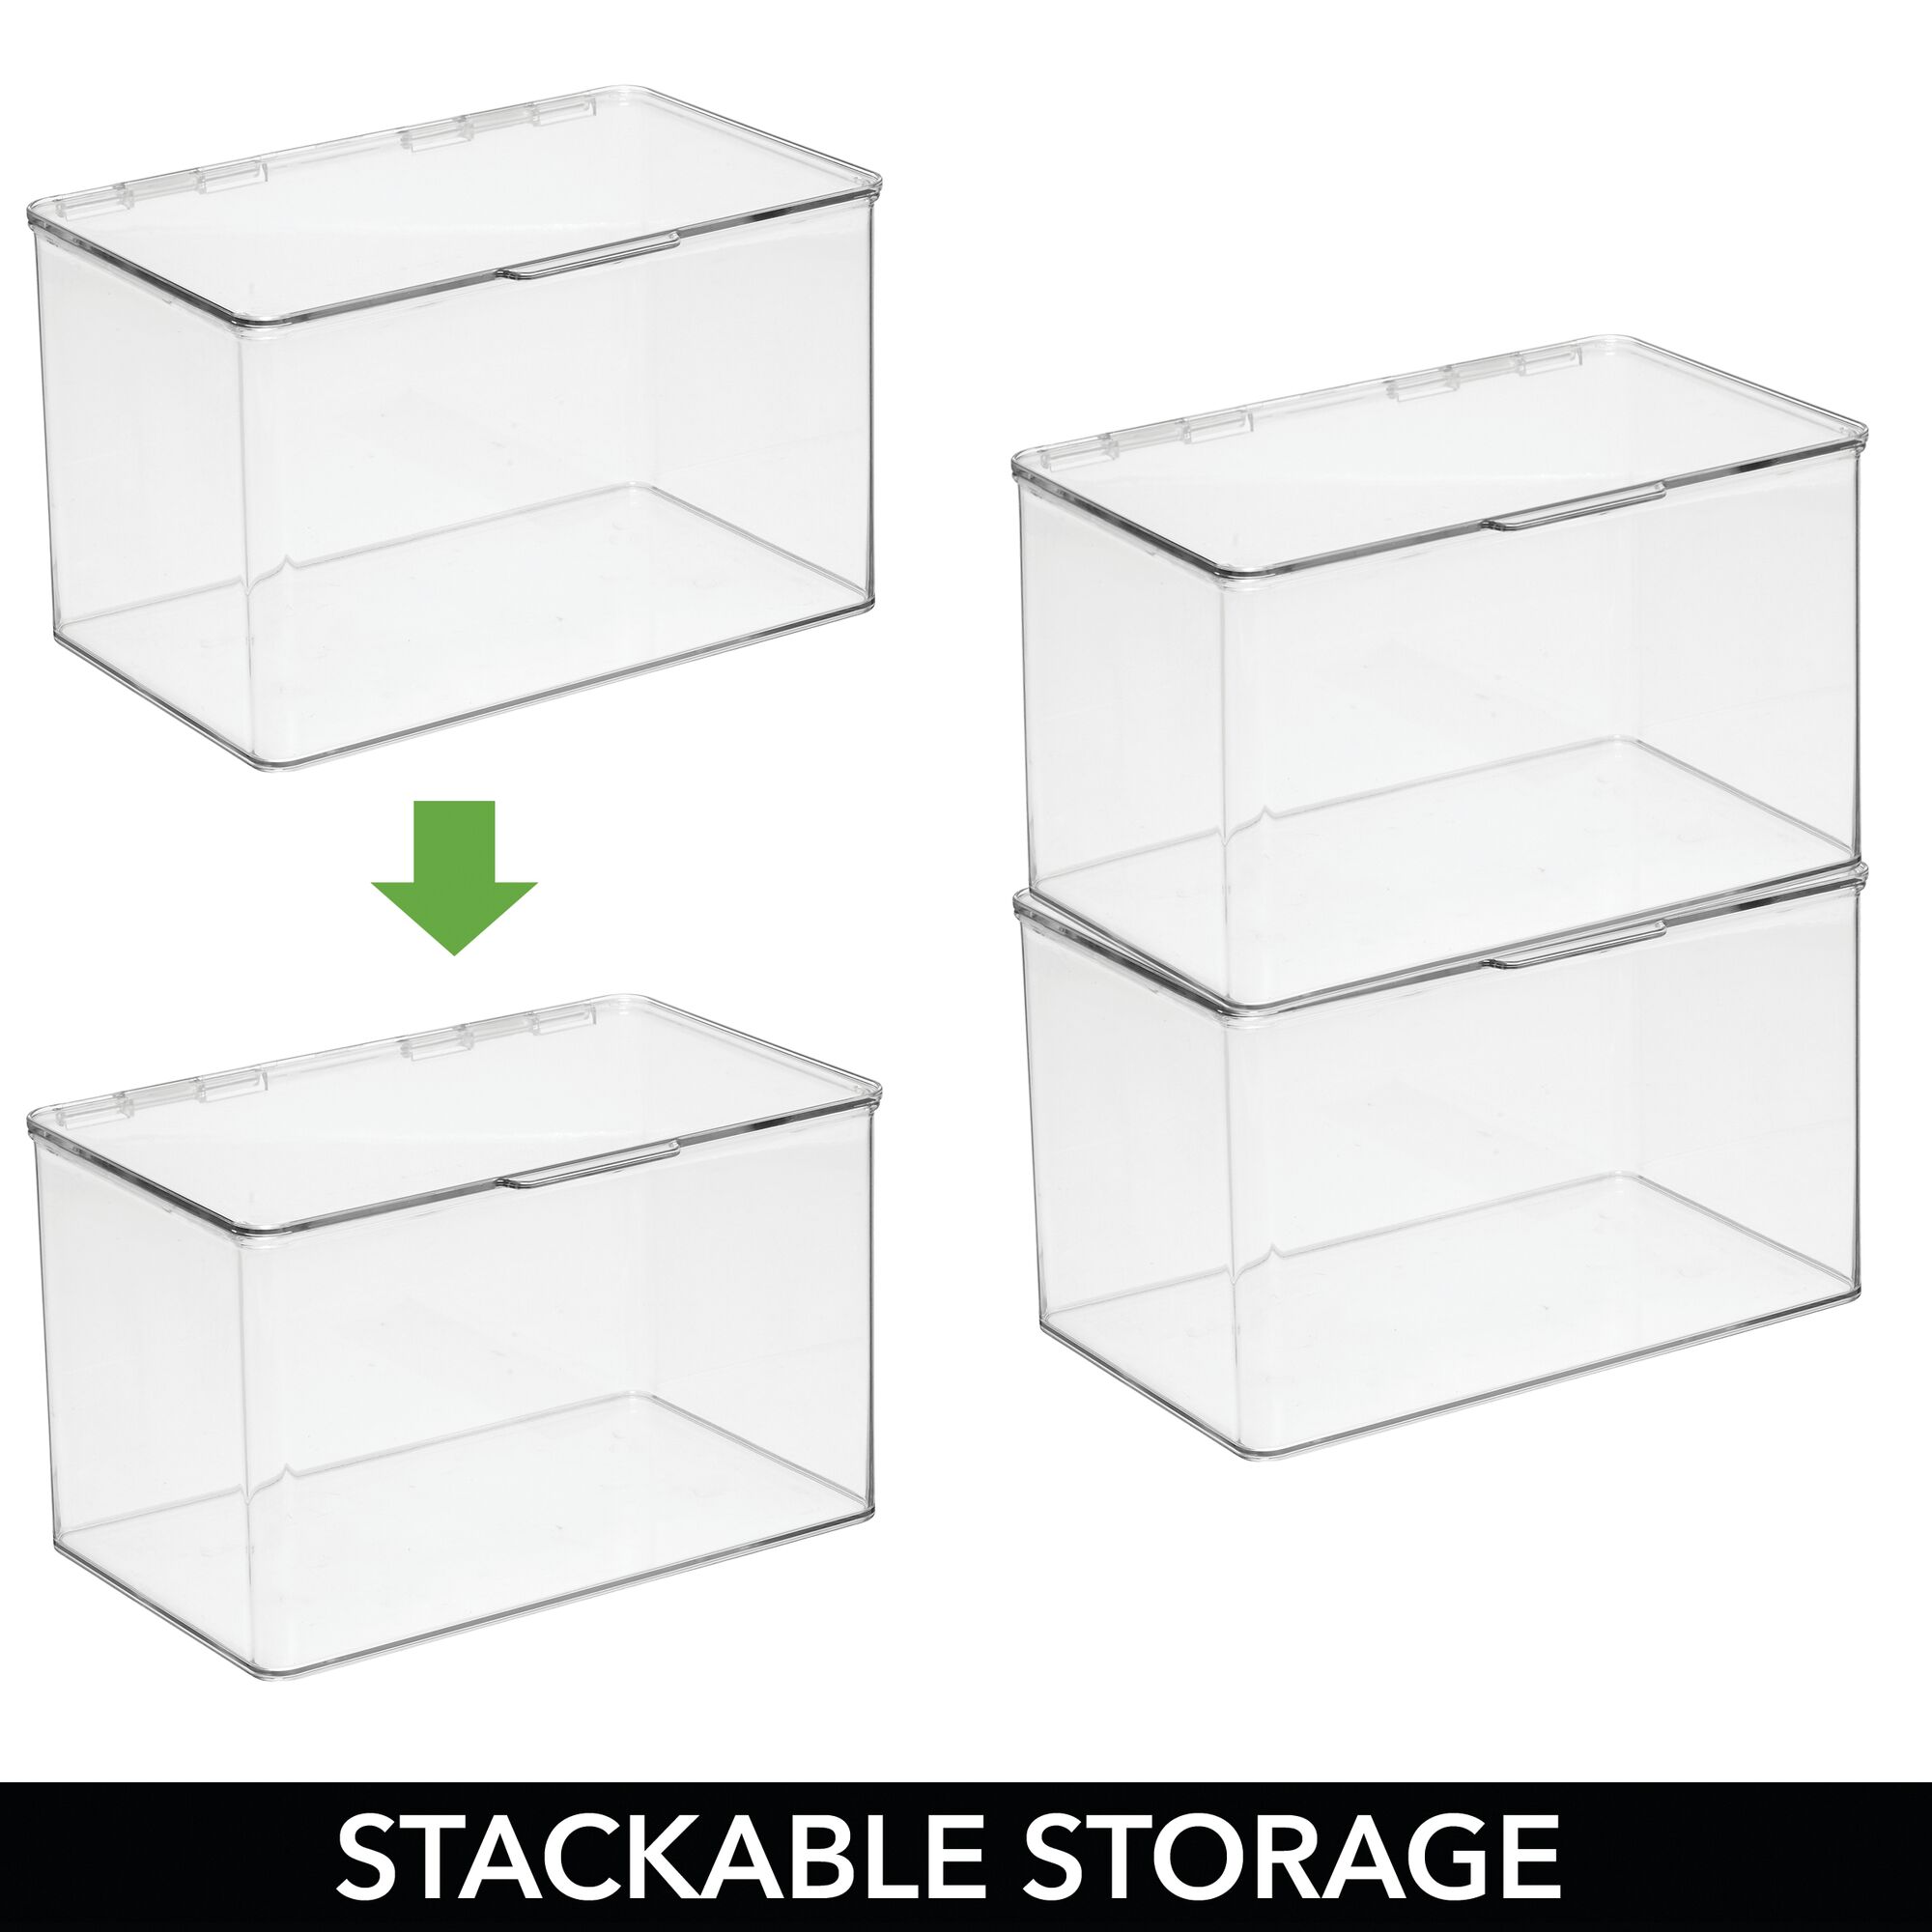 mDesign Food Storage Container Lid Holder, 3-Compartment Plastic Organizer  Bin for Organization in Kitchen Cabinets, Cupboards, Pantry Shelves - Clear